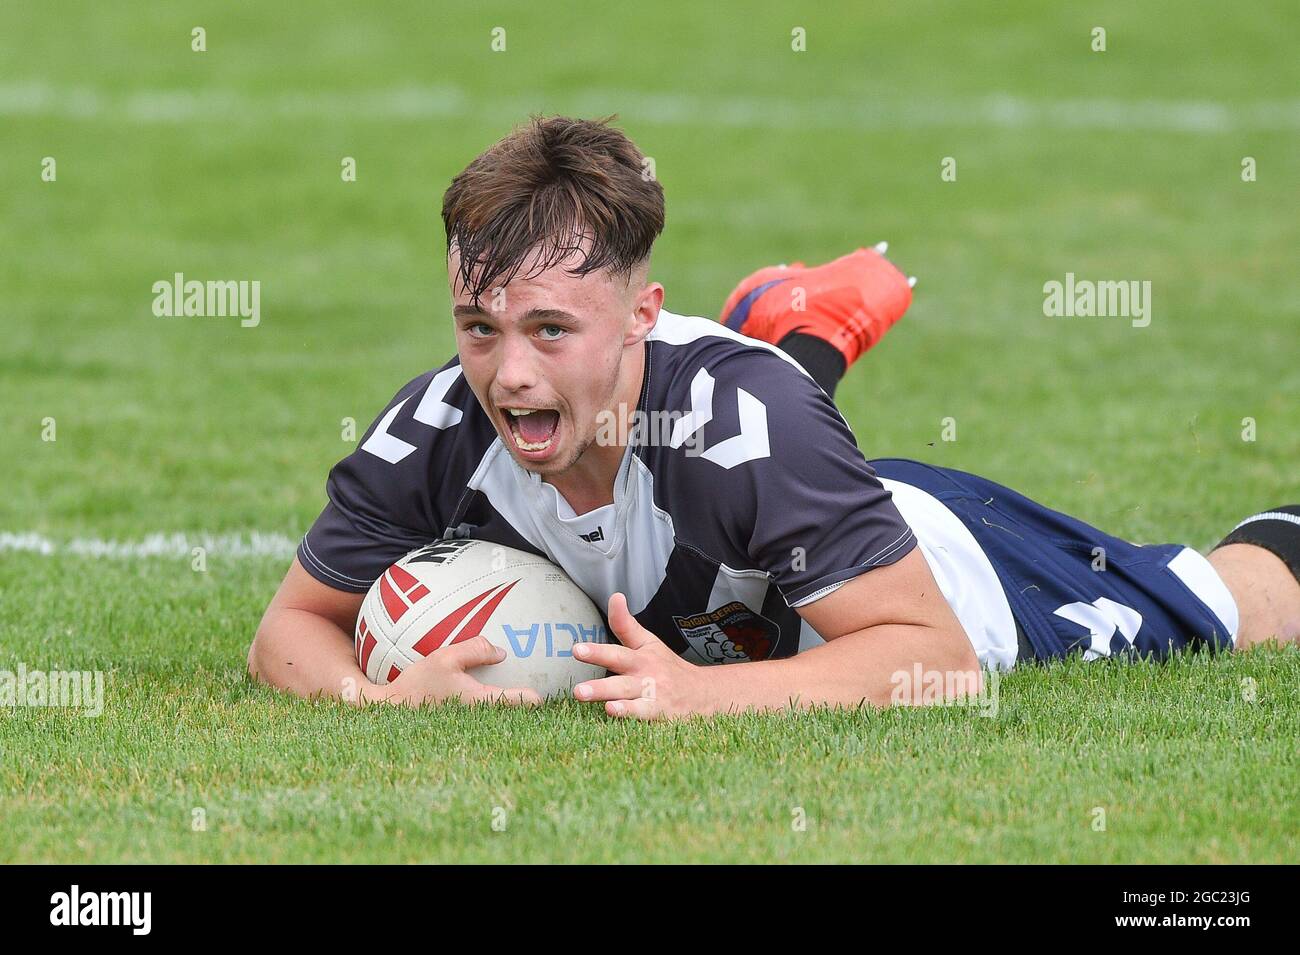 Leeds, England - 4 August 2021 - Lewis Camden (Bradford Bulls) of Yorkshire Academy scores a try during the Rugby League Roses Academy Match Yorkshire Academy vs Lancashire Academy at Weetwood Hall, Leeds, UK  Dean Williams Stock Photo